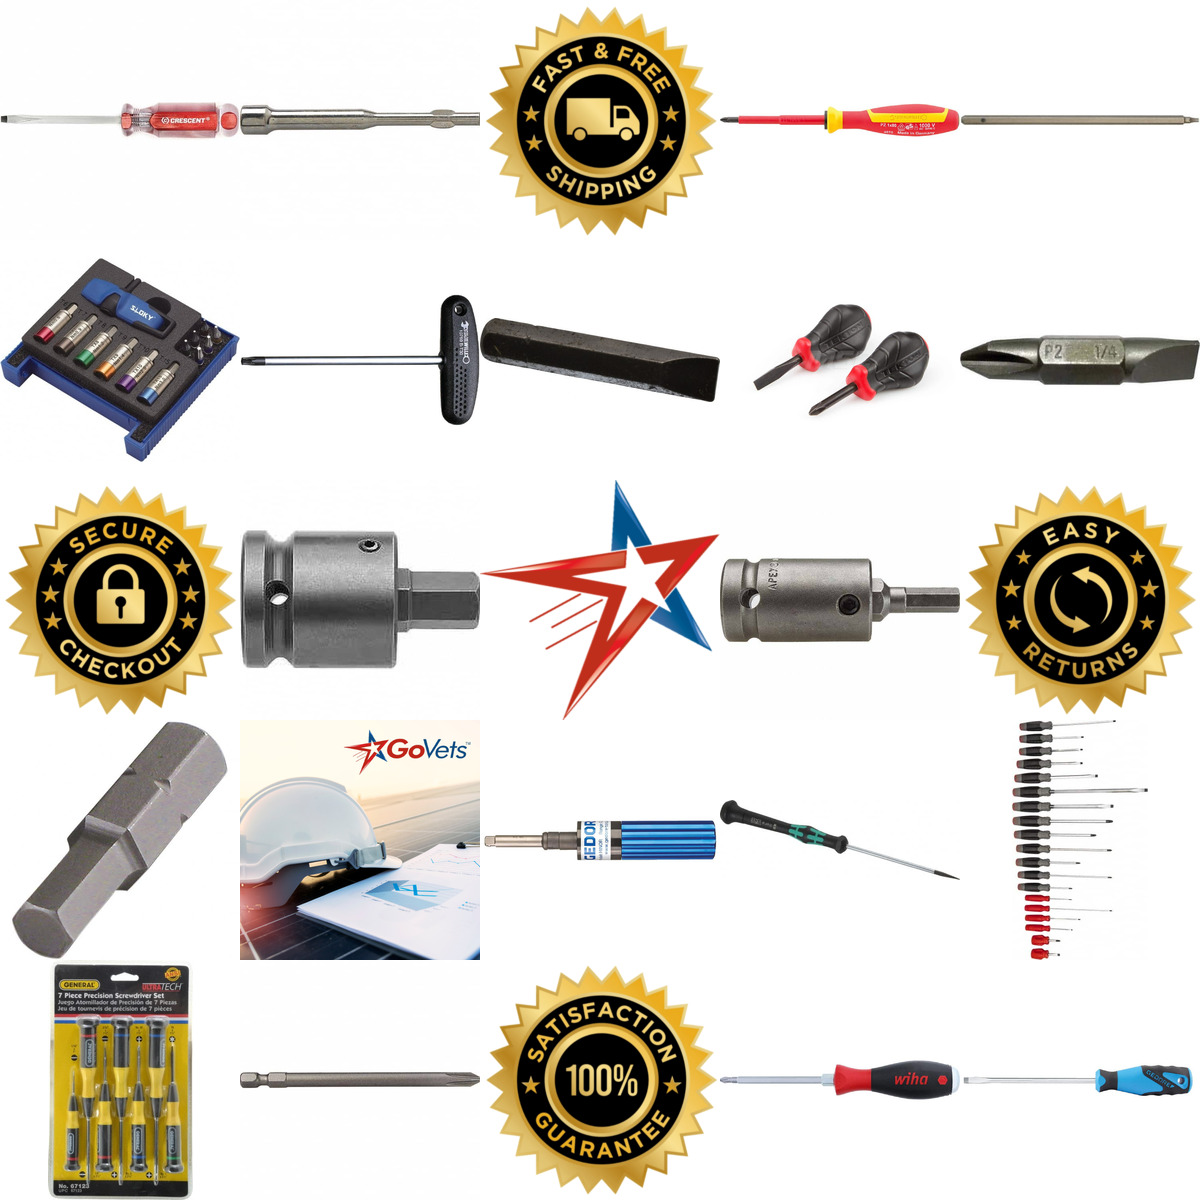 A selection of Screwdrivers products on GoVets